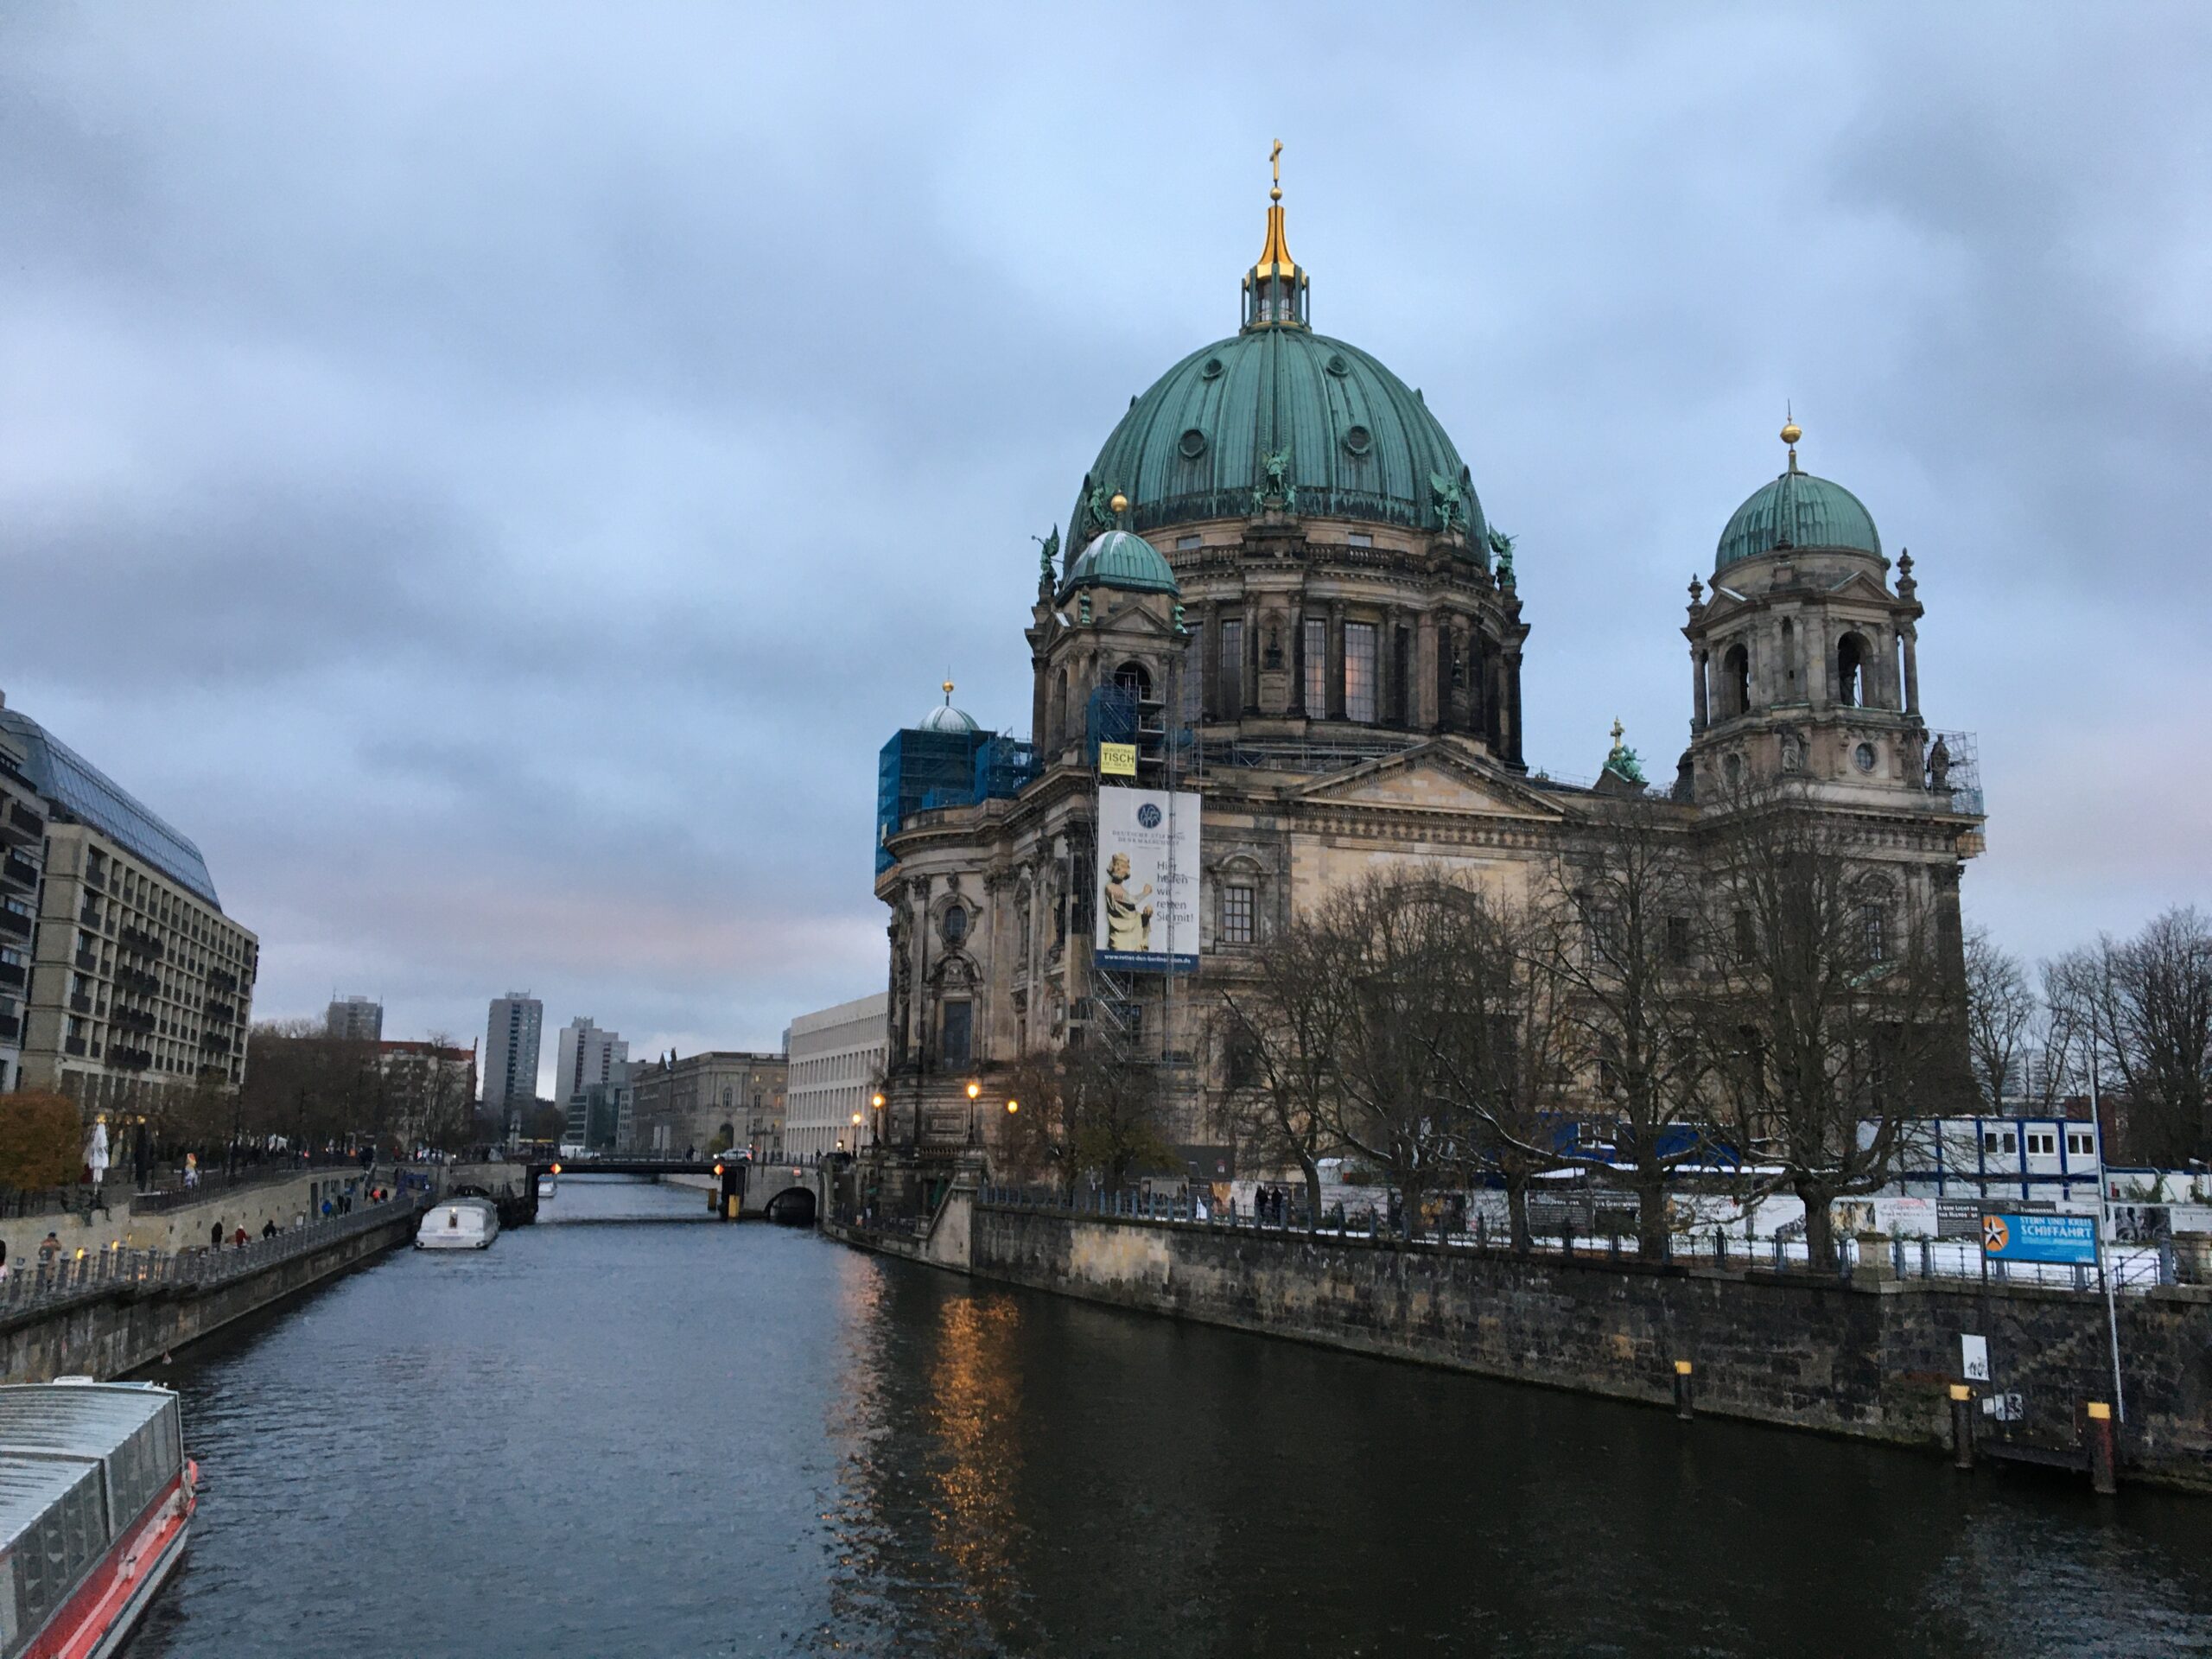 The Berlin Cathedral overlooking the River Spree.